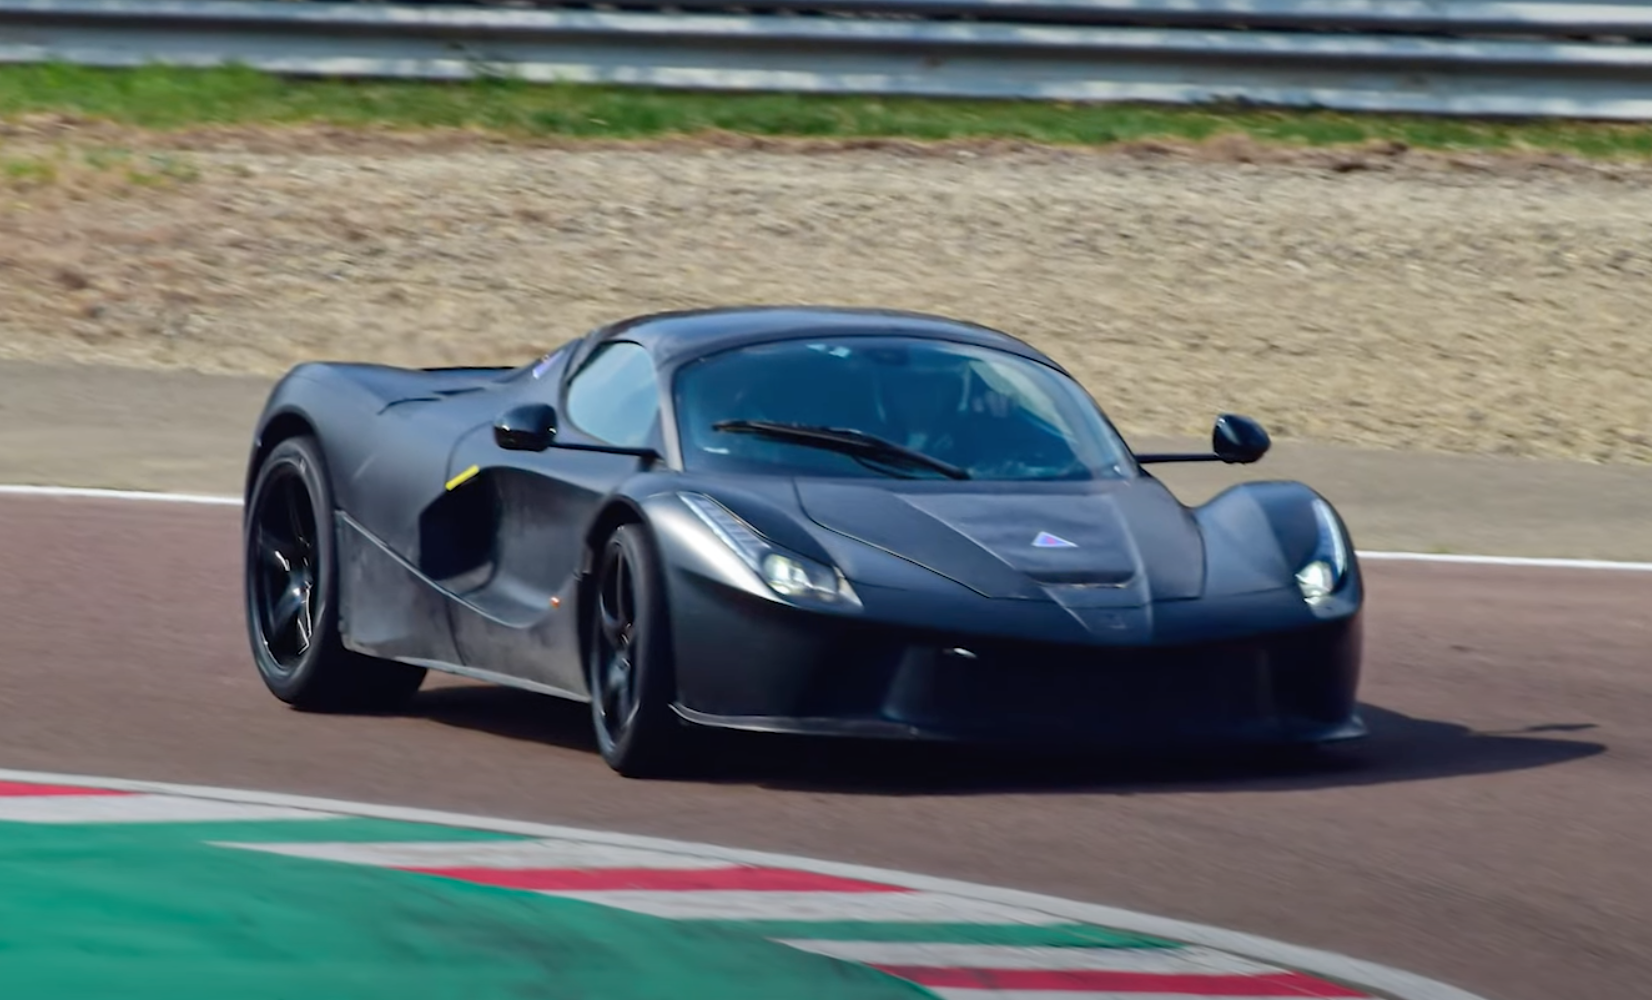 An image of a Ferrari prototype out on track.